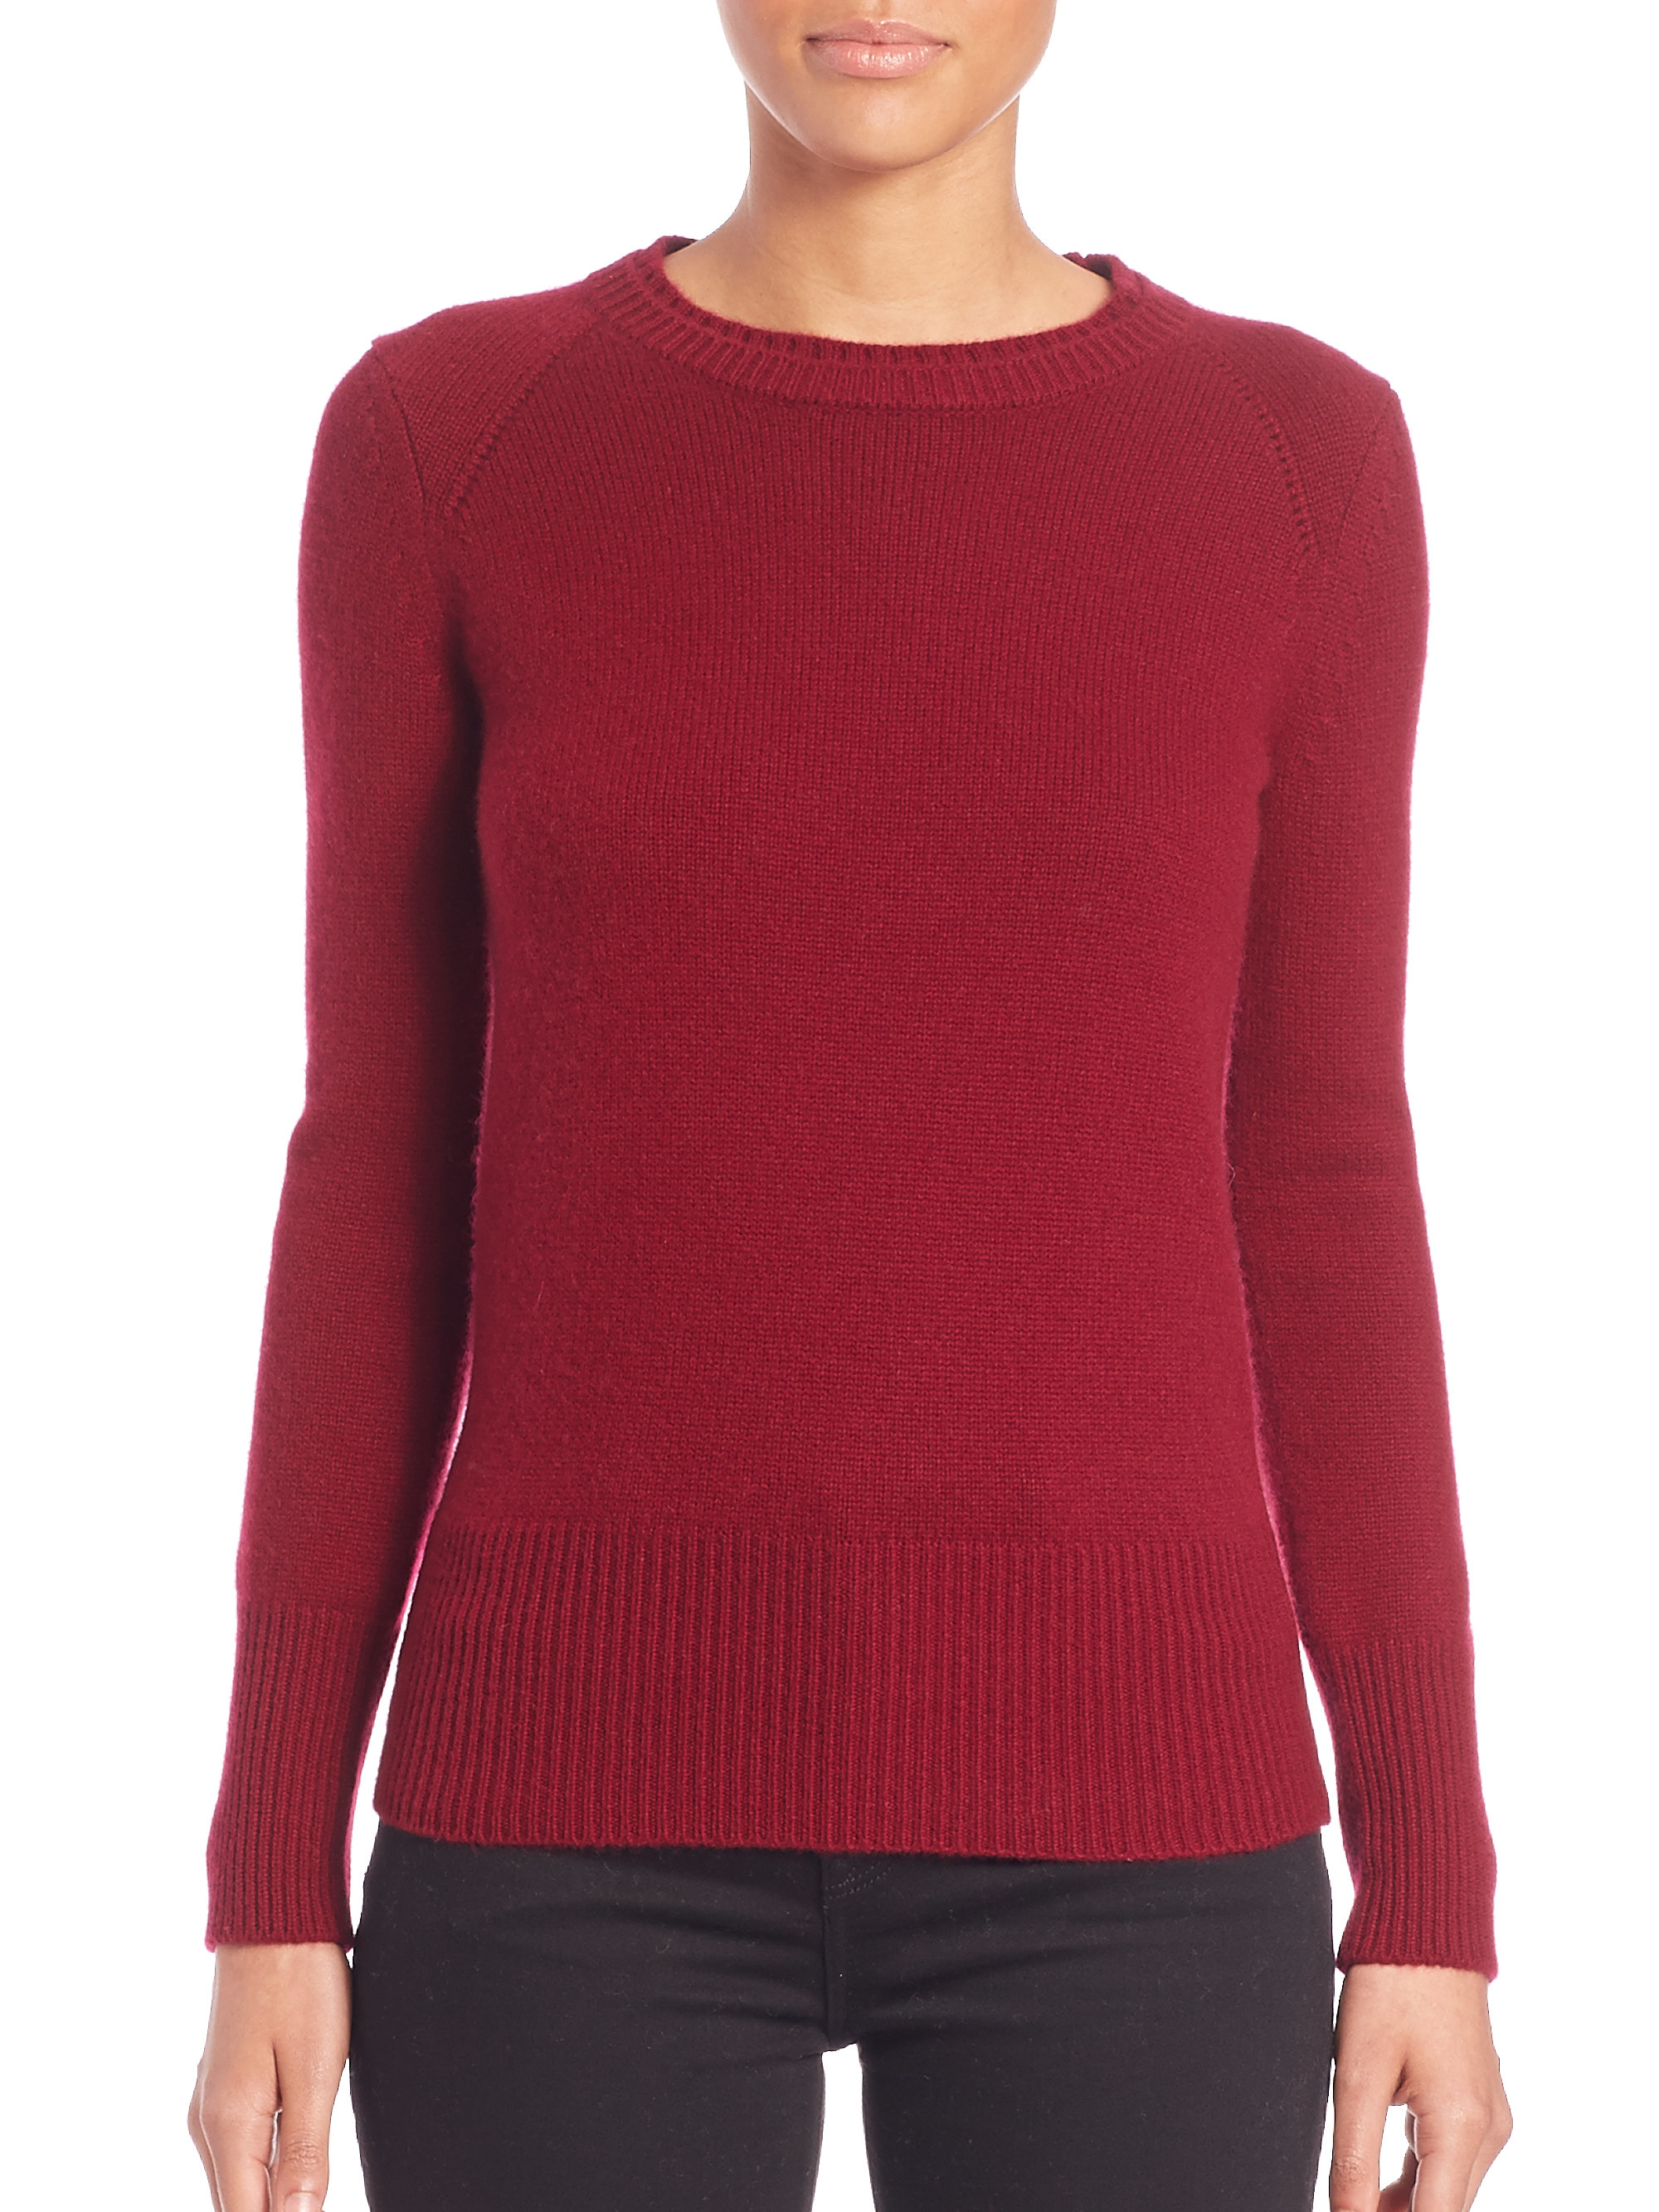 Burberry Cherry Pink Cashmere Knit Sweater in Red | Lyst